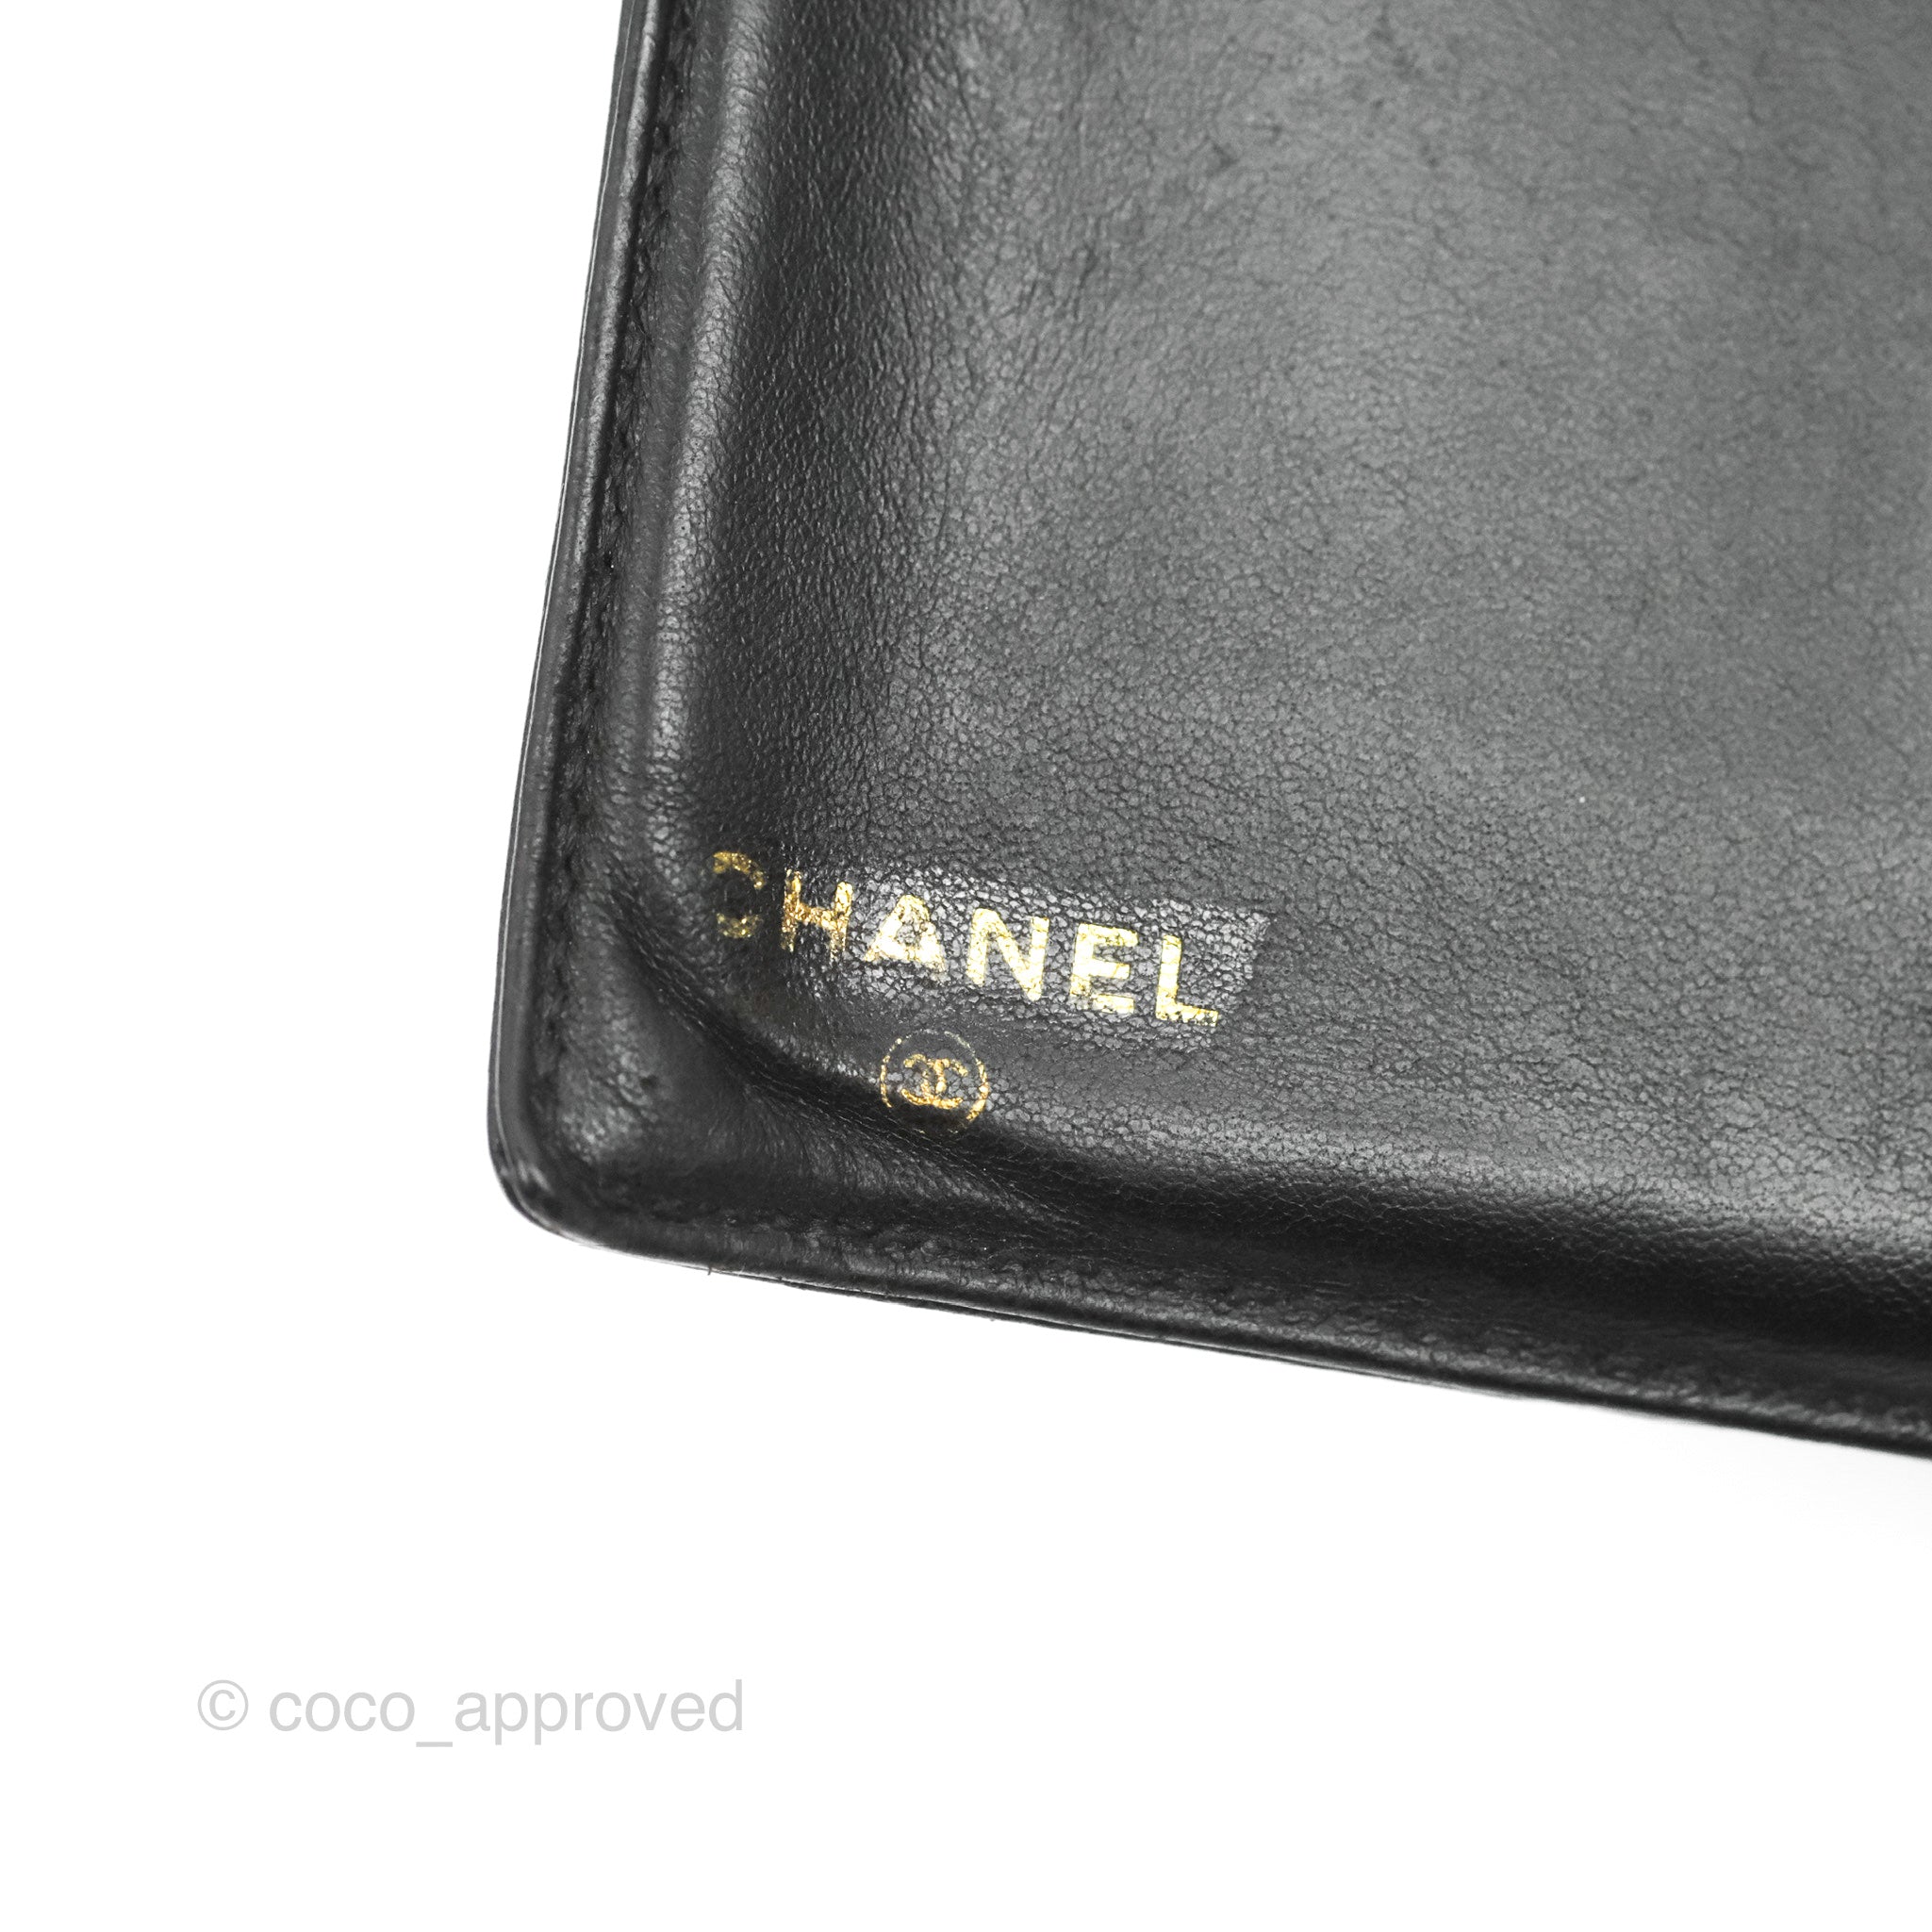 Sold at Auction: AUTHENTIC CHANEL VINTAGE LEATHER LONG WALLET